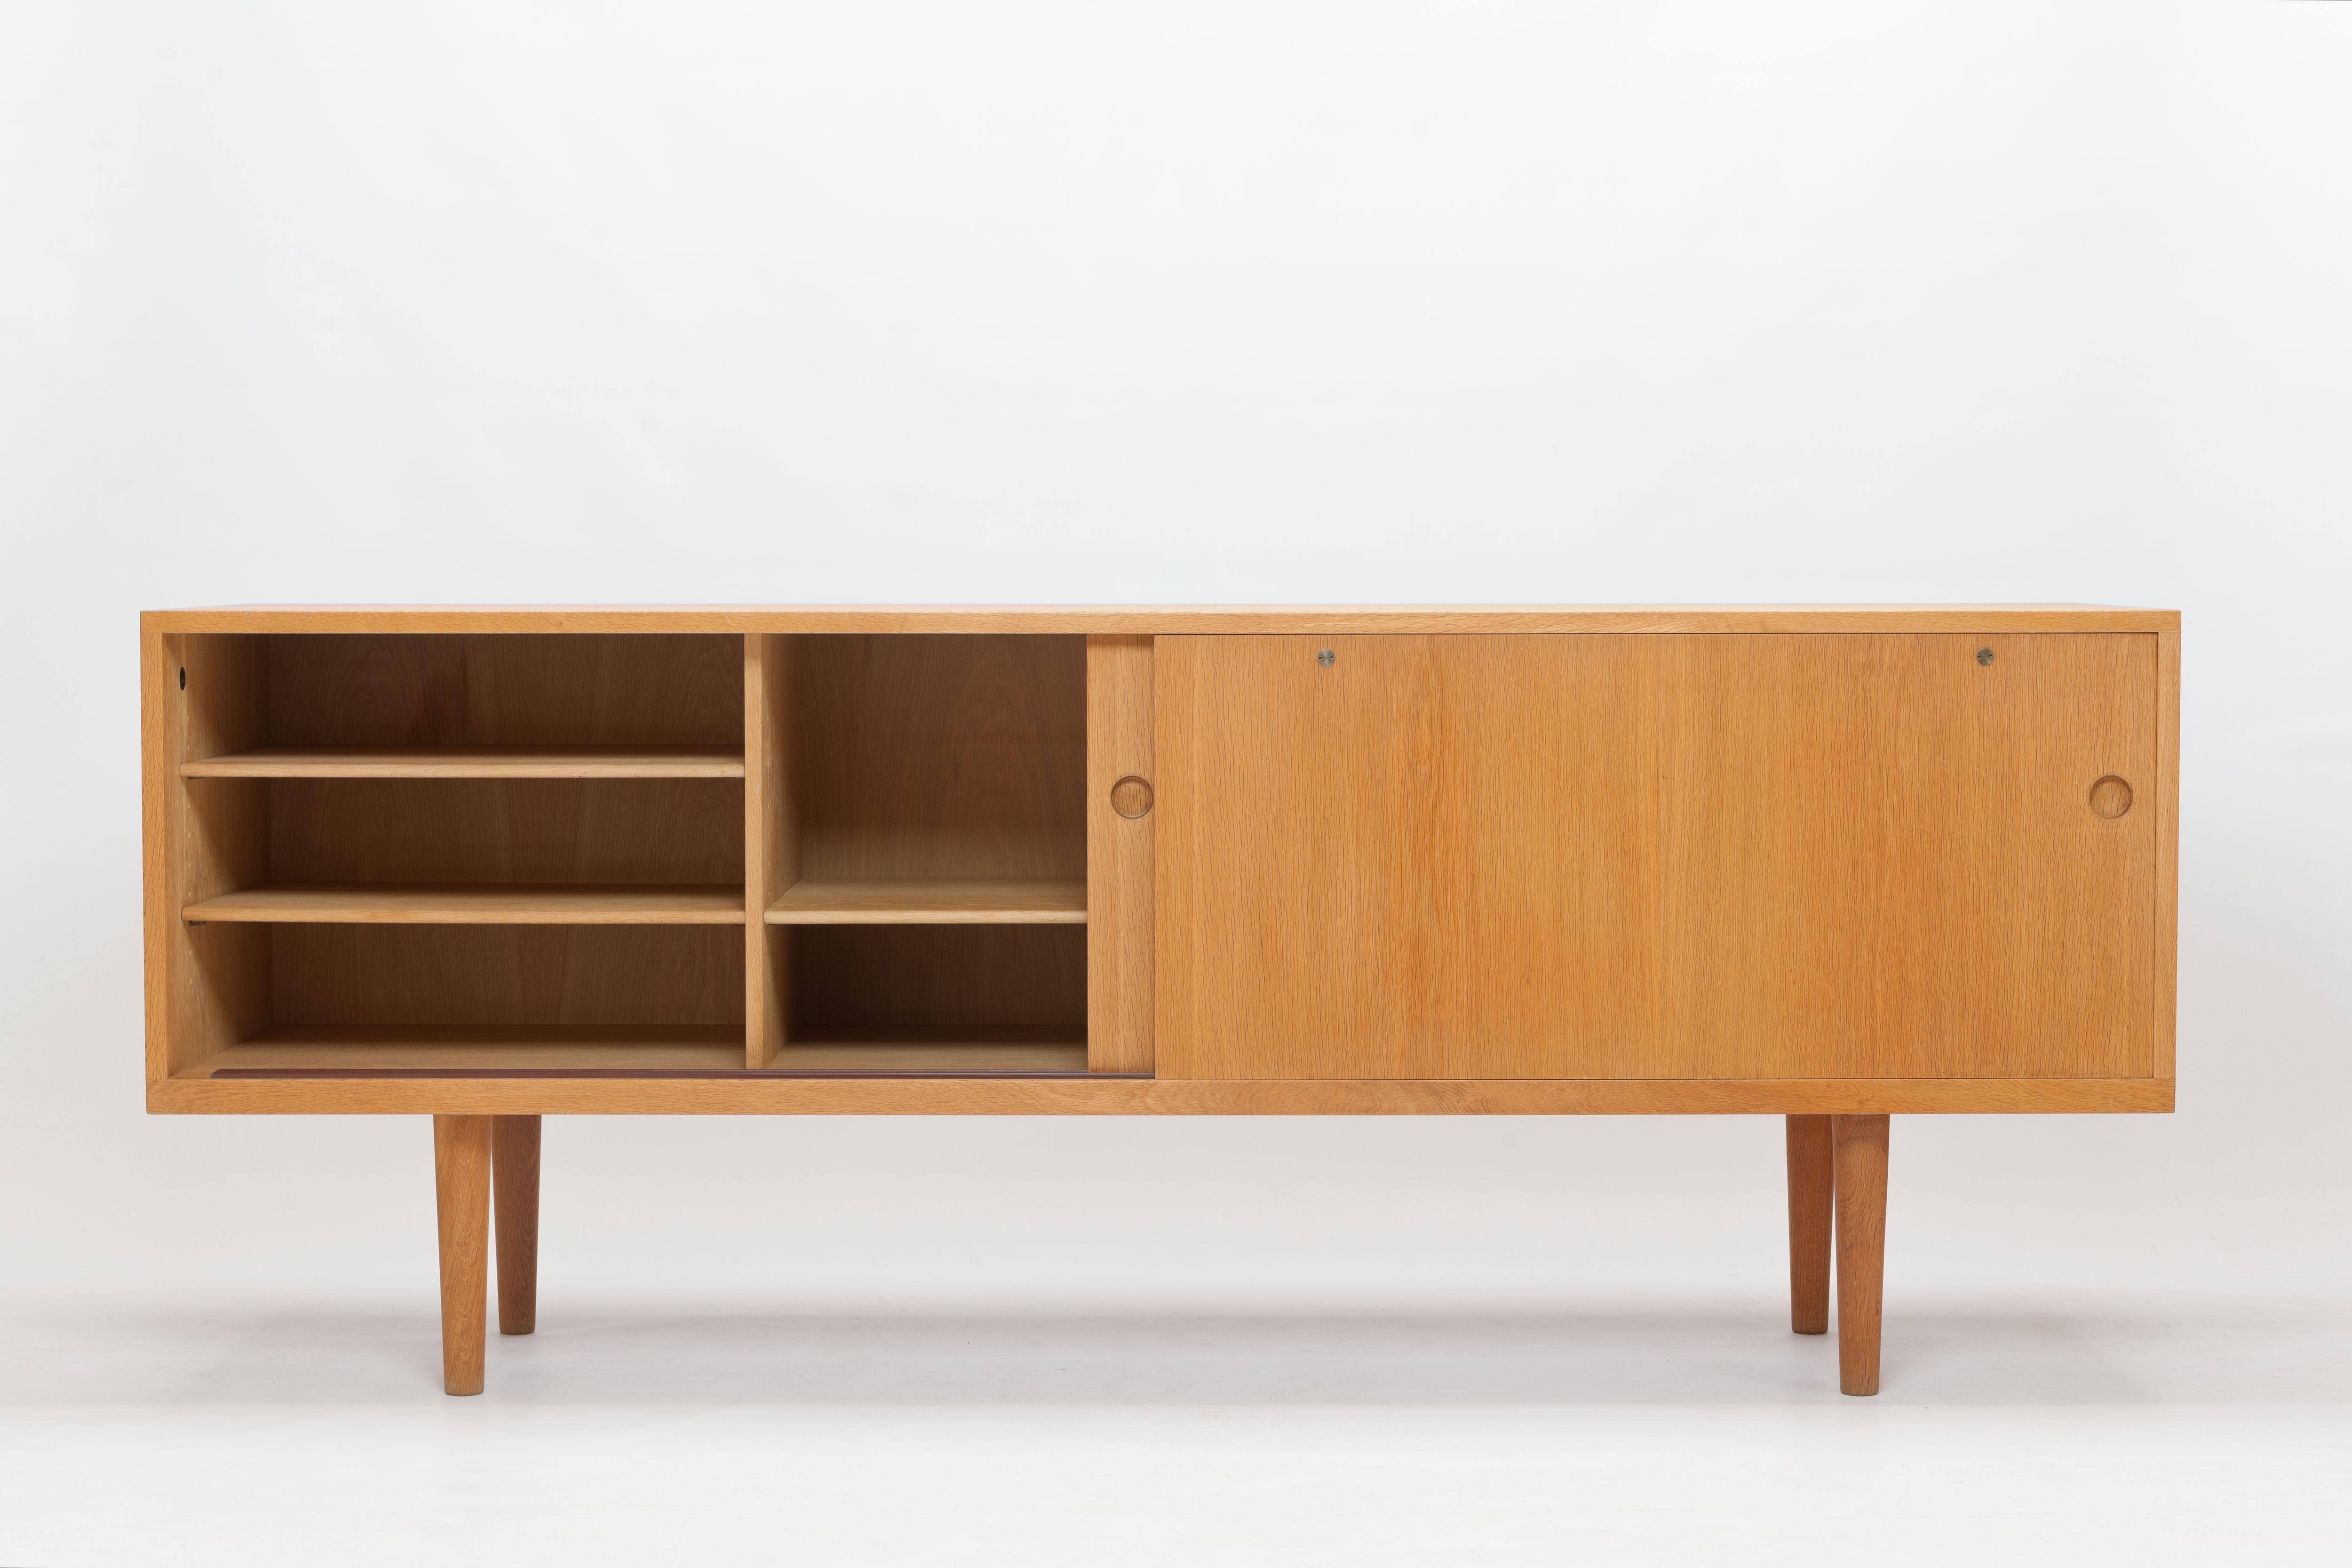 This sideboard, model RY26, is a wonderful example of a characteristic Hans j. Wegner design: a sober timeless and understated functional design of exceptionally high quality. 

The cabinet is made of oak, mainly solid wood, with the only